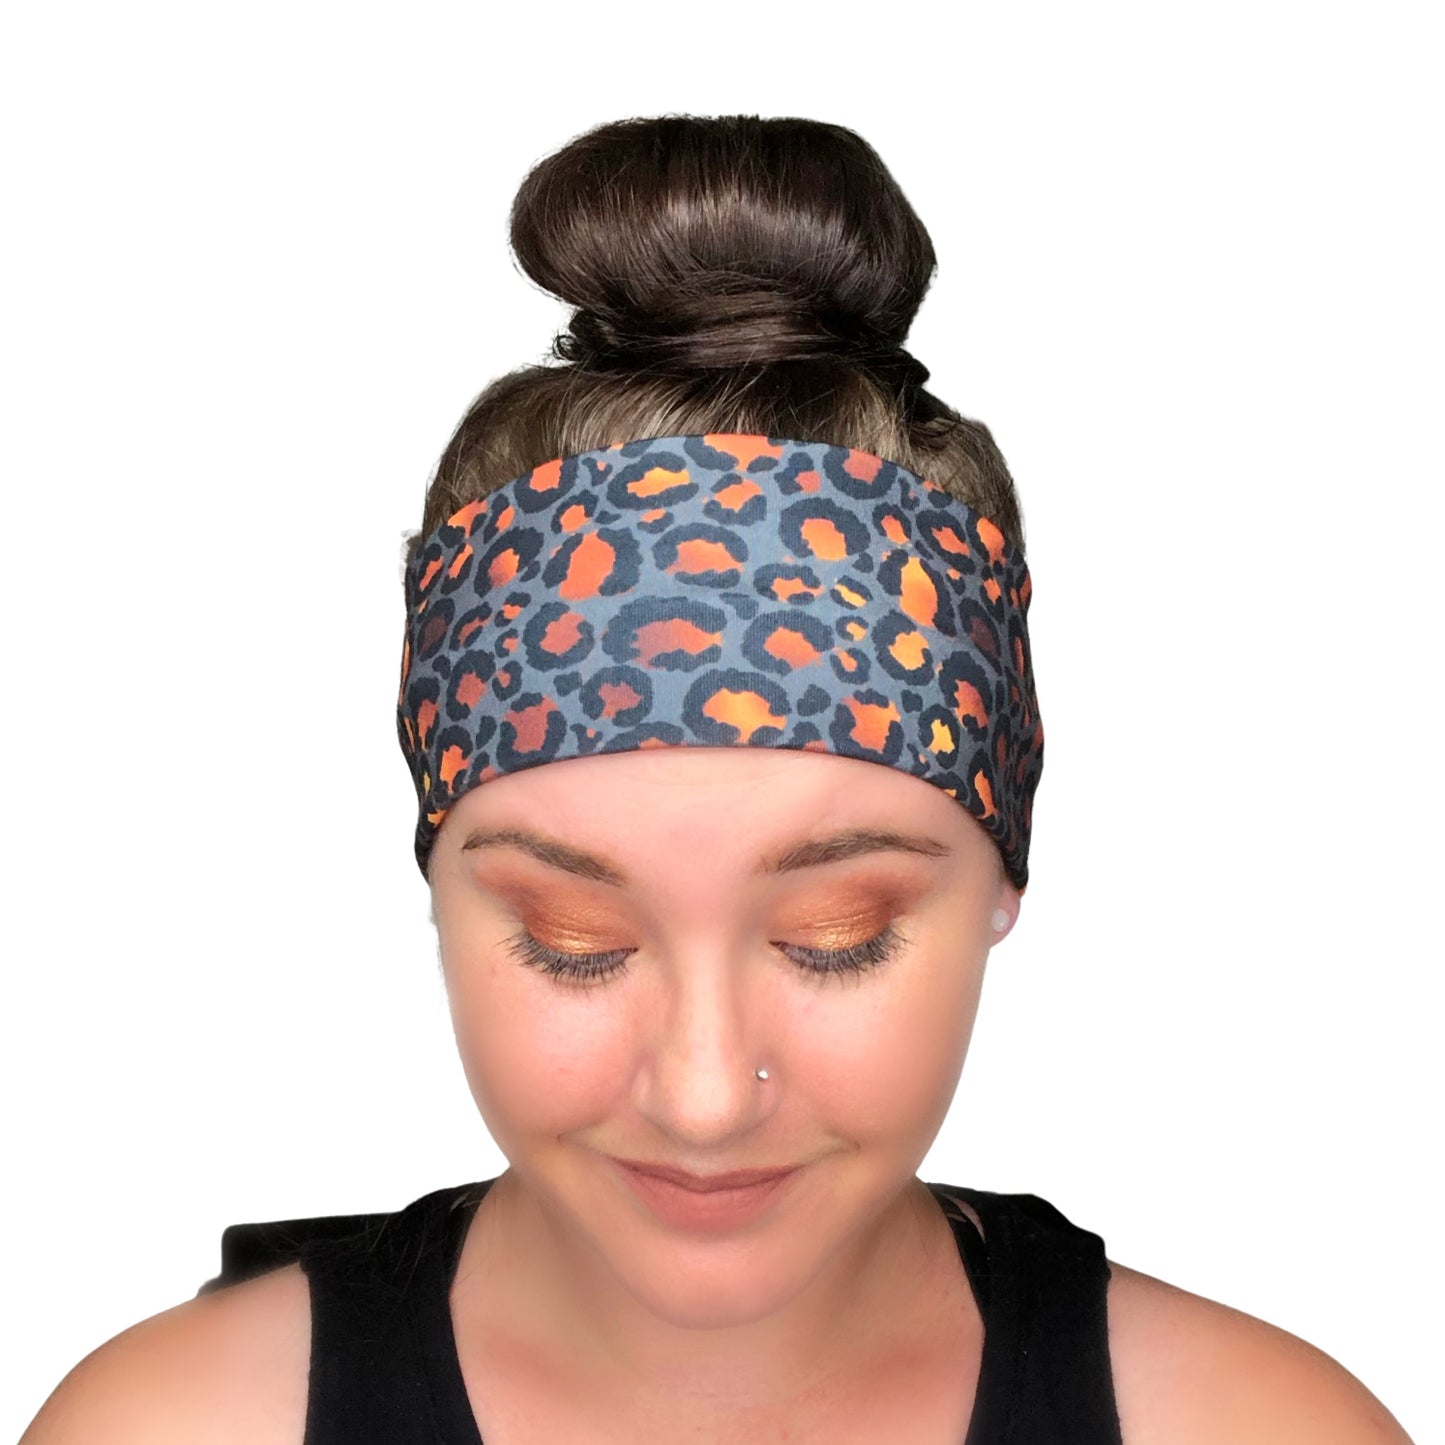 Red, White and Blue Tie Dye Headband for Women